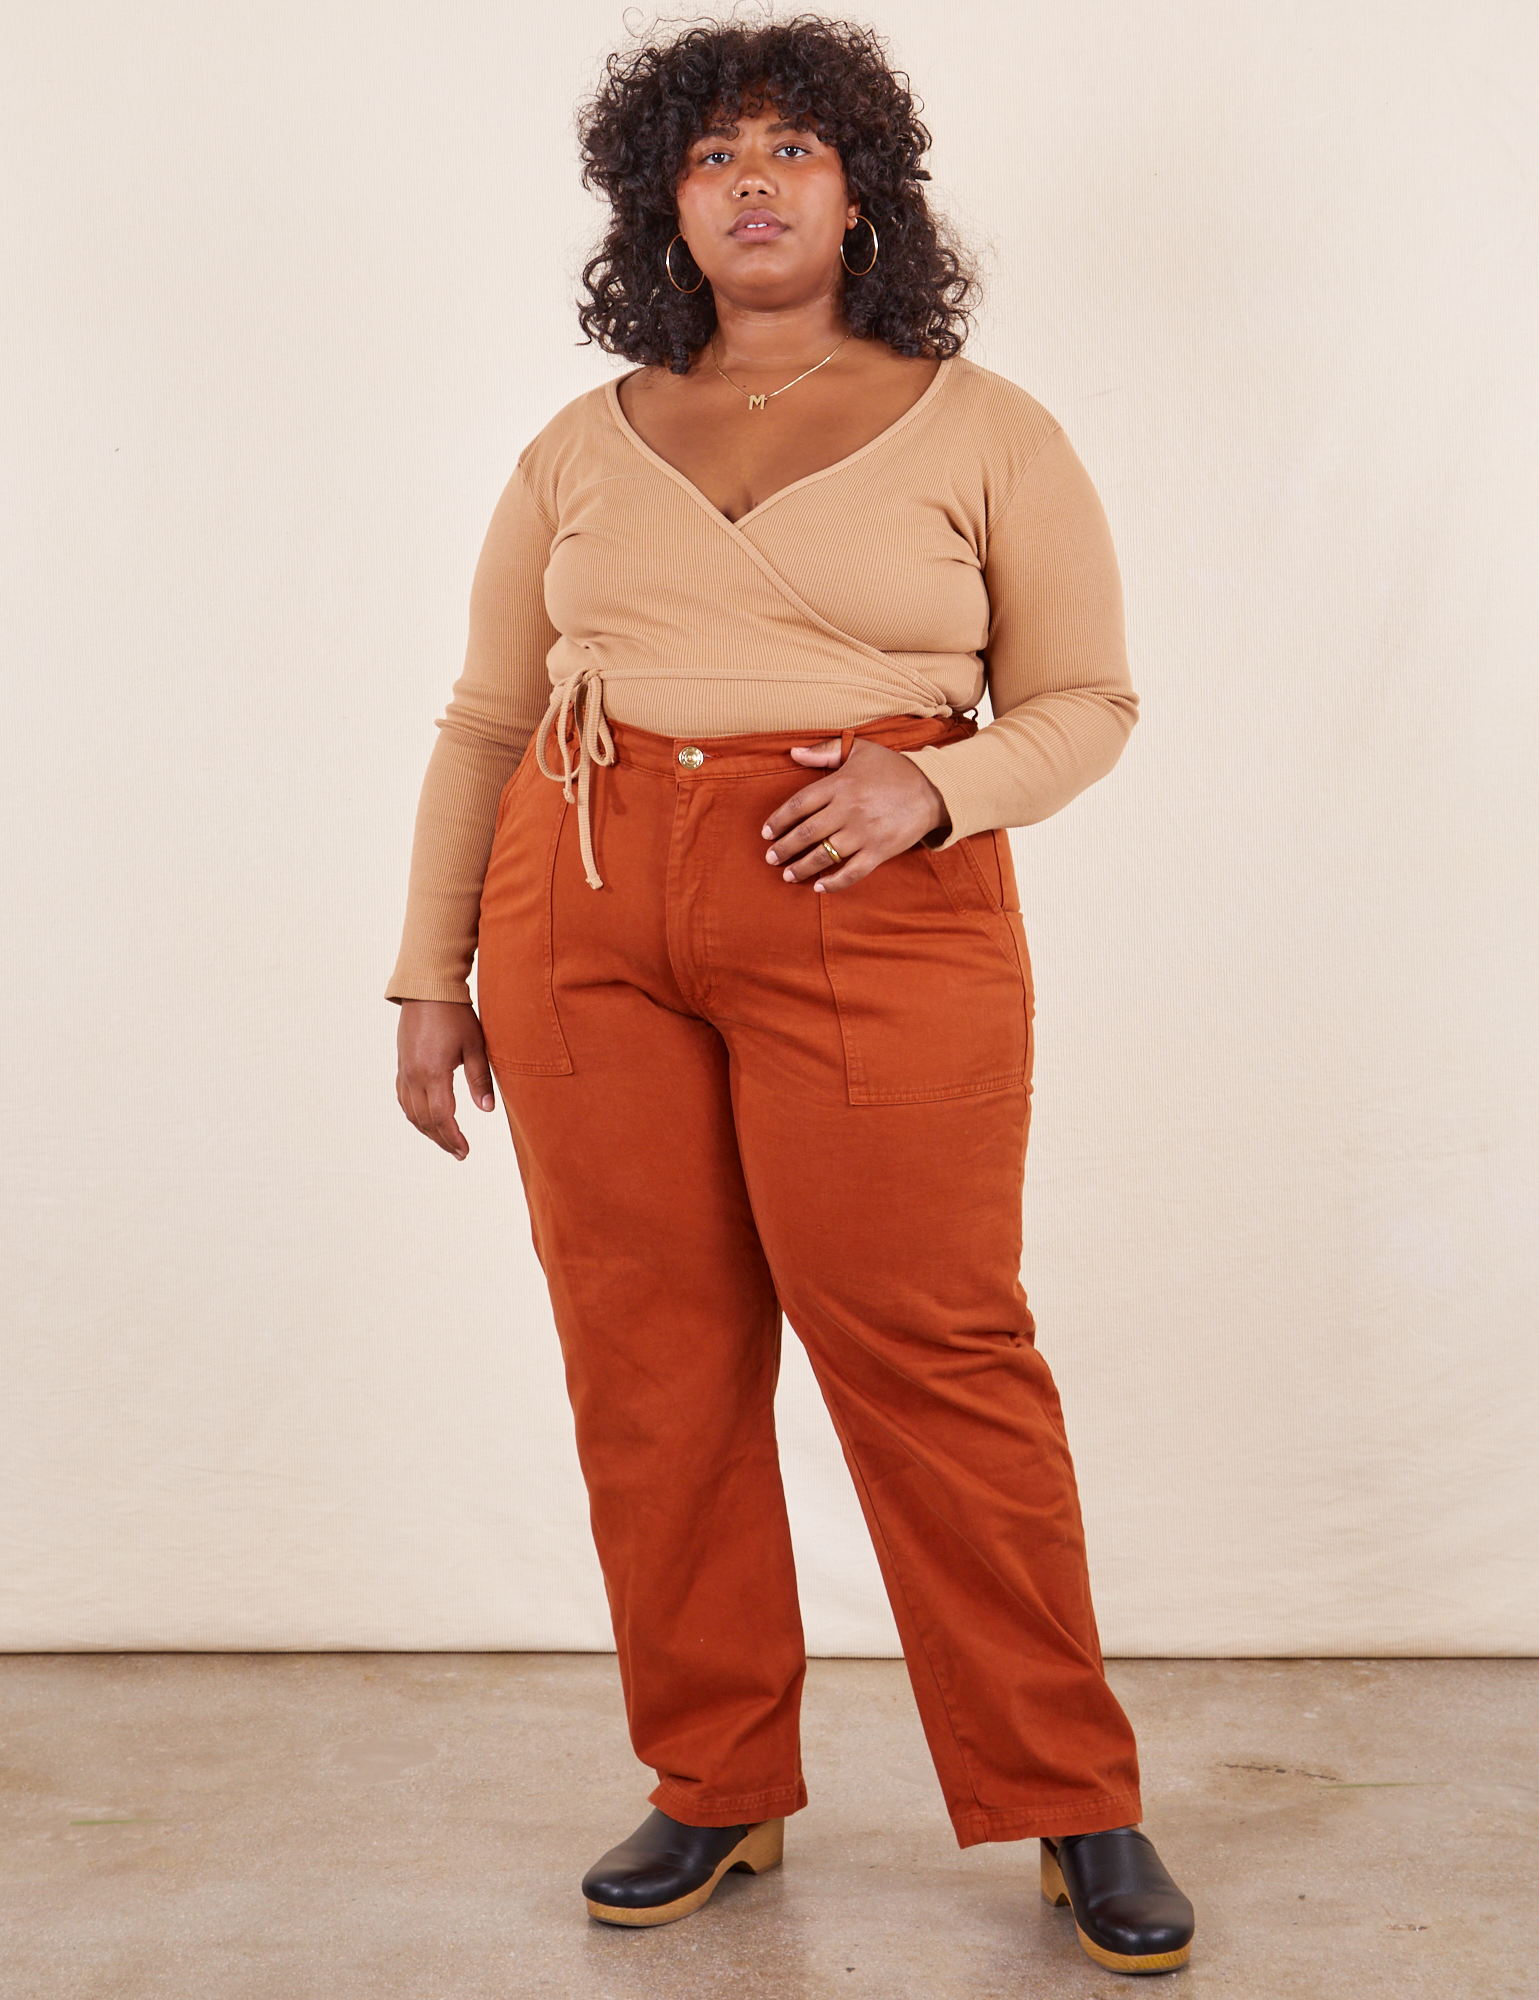 Morgan is 5'5" and wearing 3XL Work Pants in Burnt Terracotta paired with tan Wrap Top